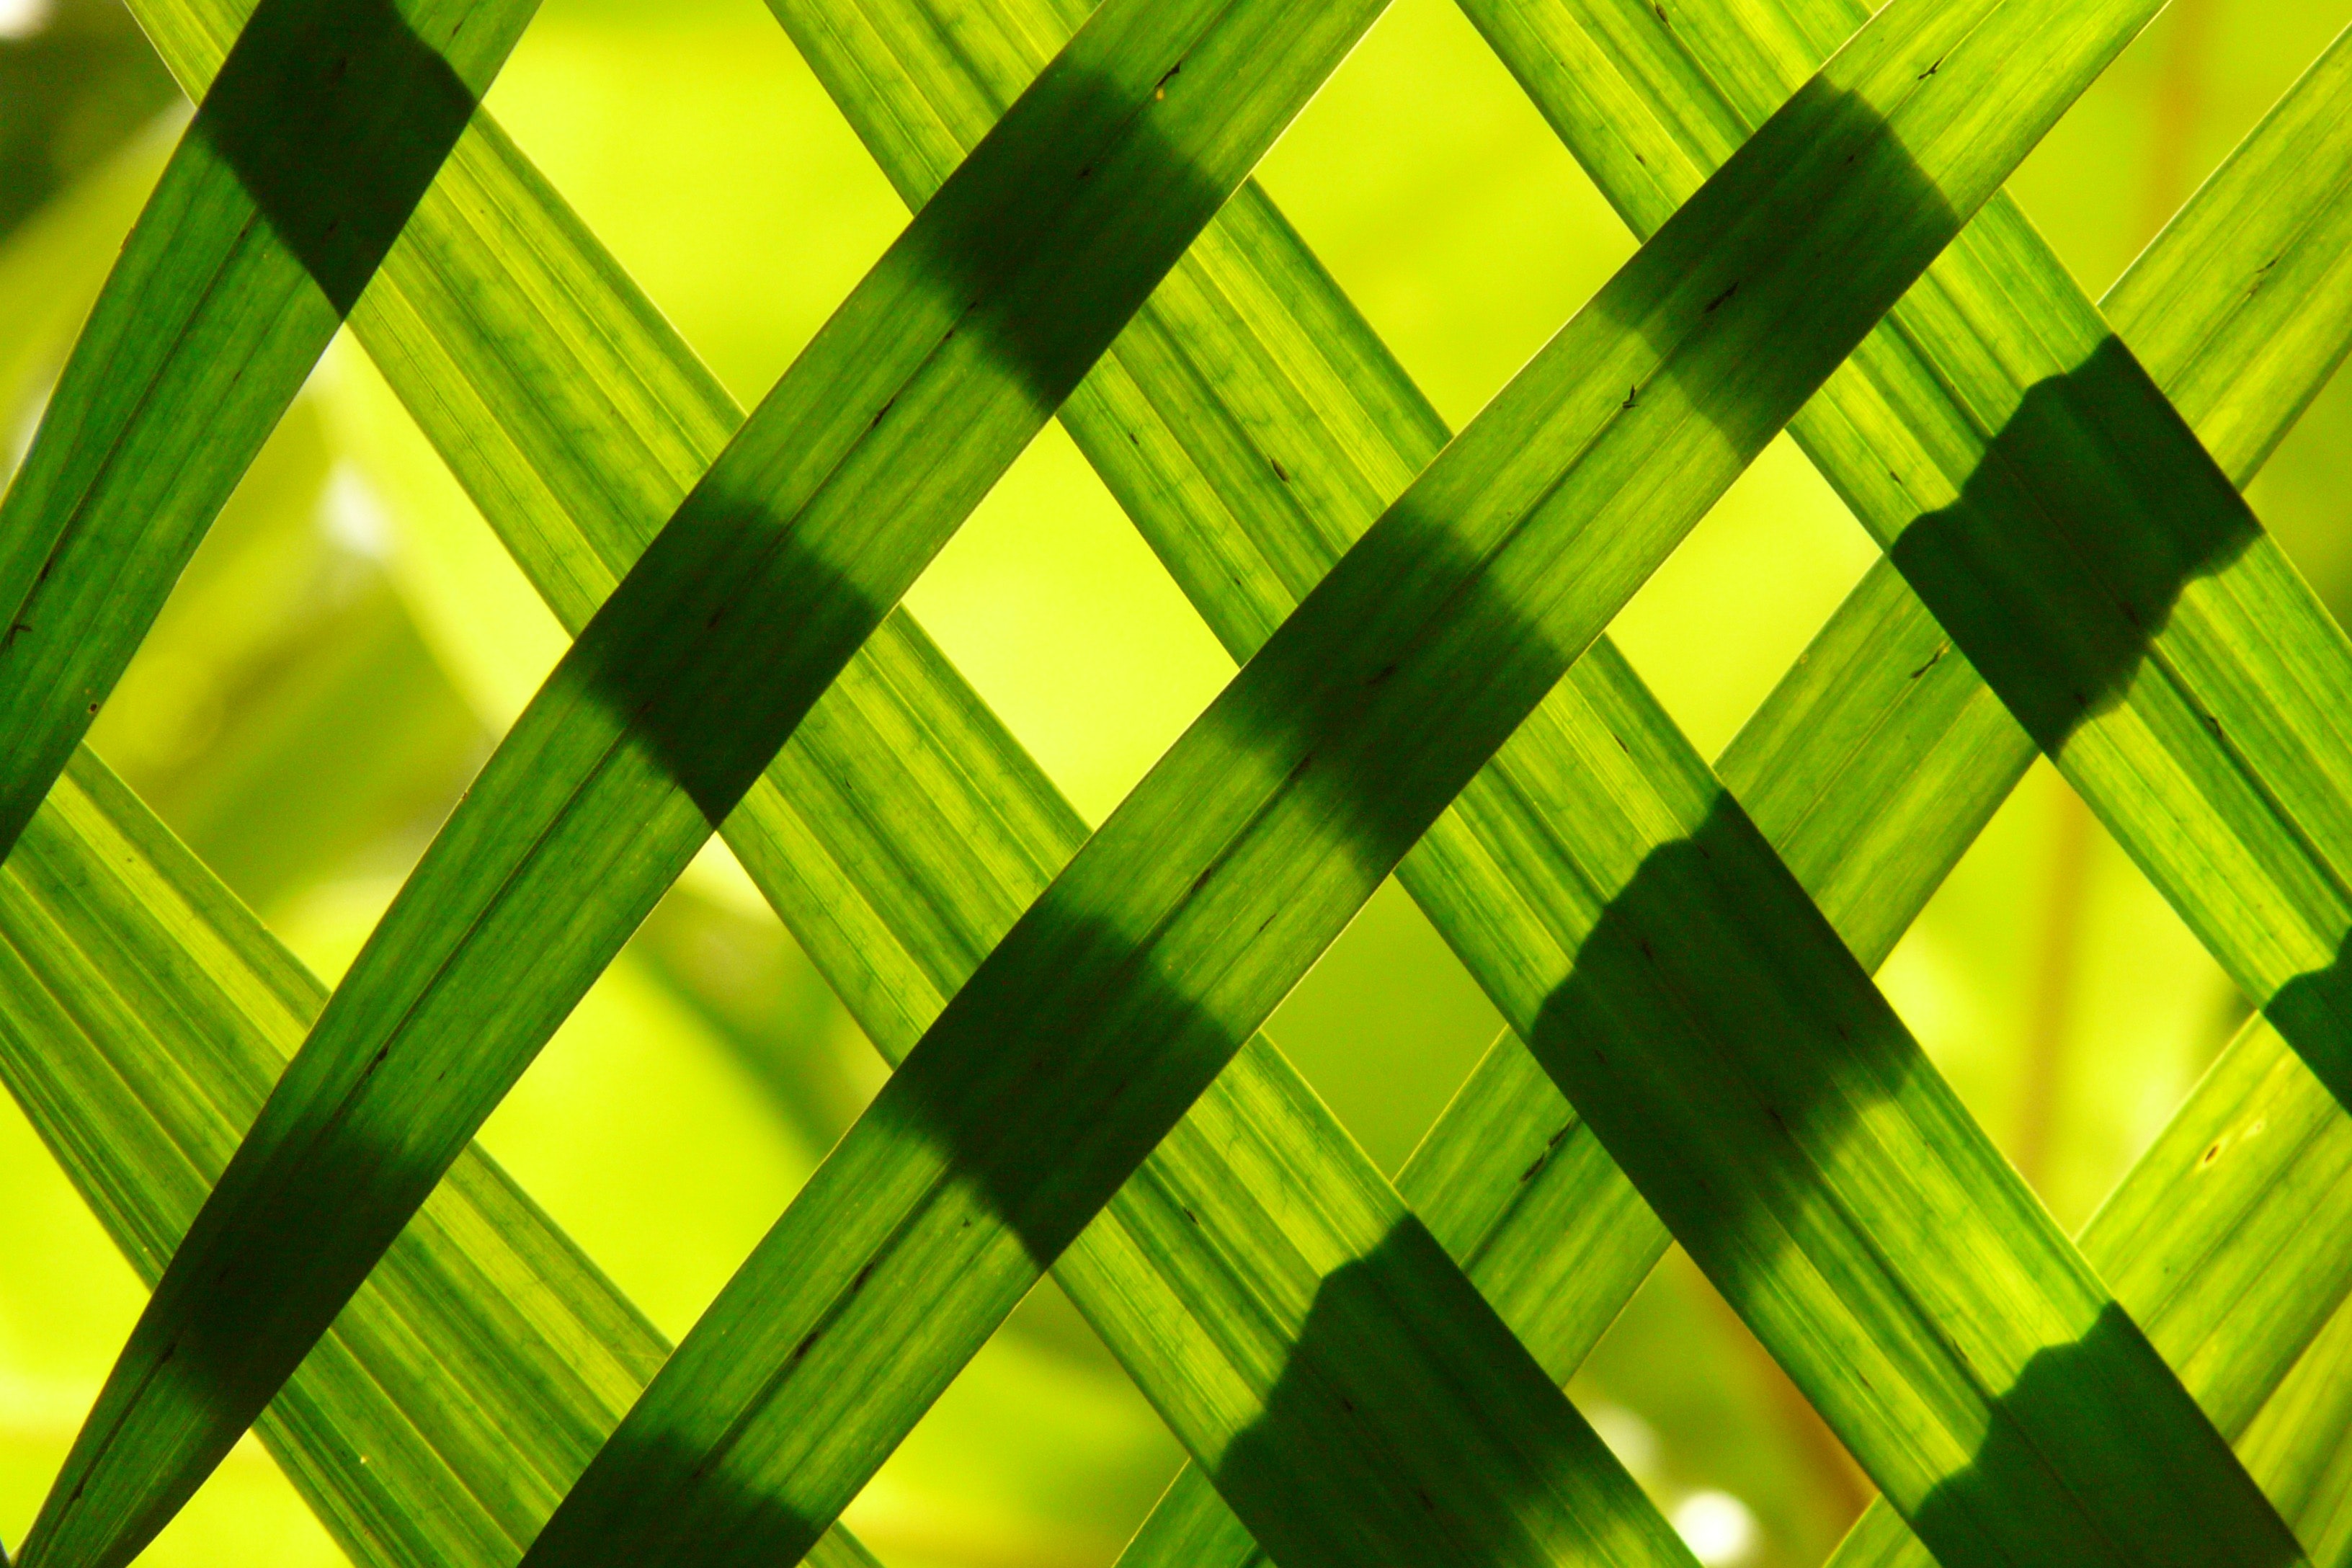 Green Woven Frame, Abstract, Art, Bamboo, Checked, HQ Photo